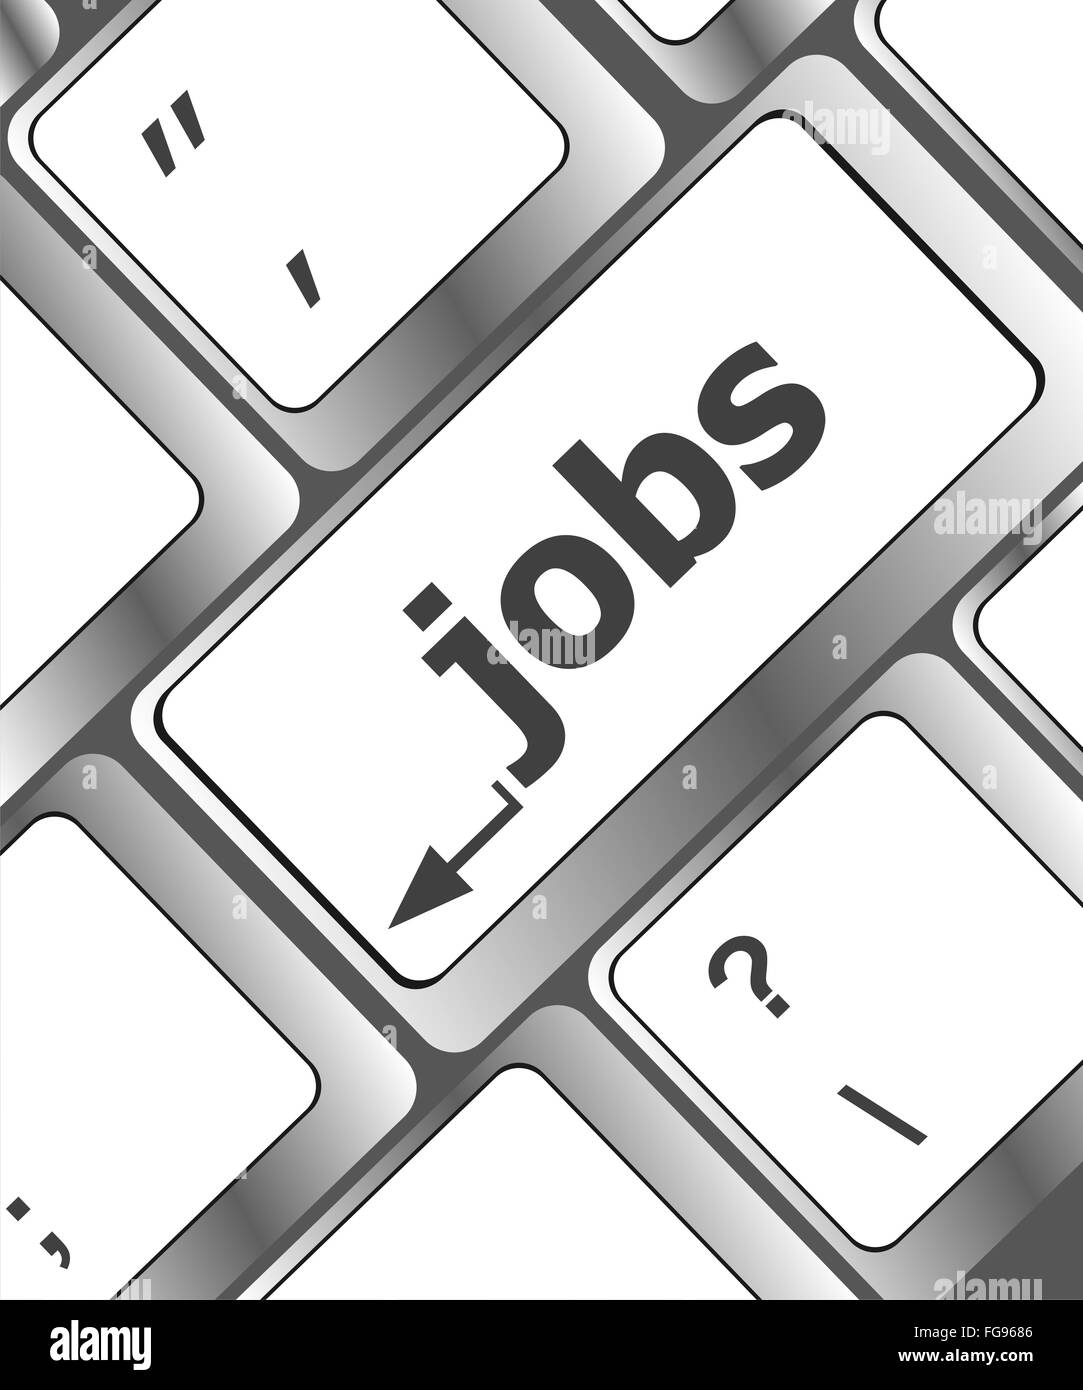 Computer keyboard with jobs on enter key - business concept Stock Photo